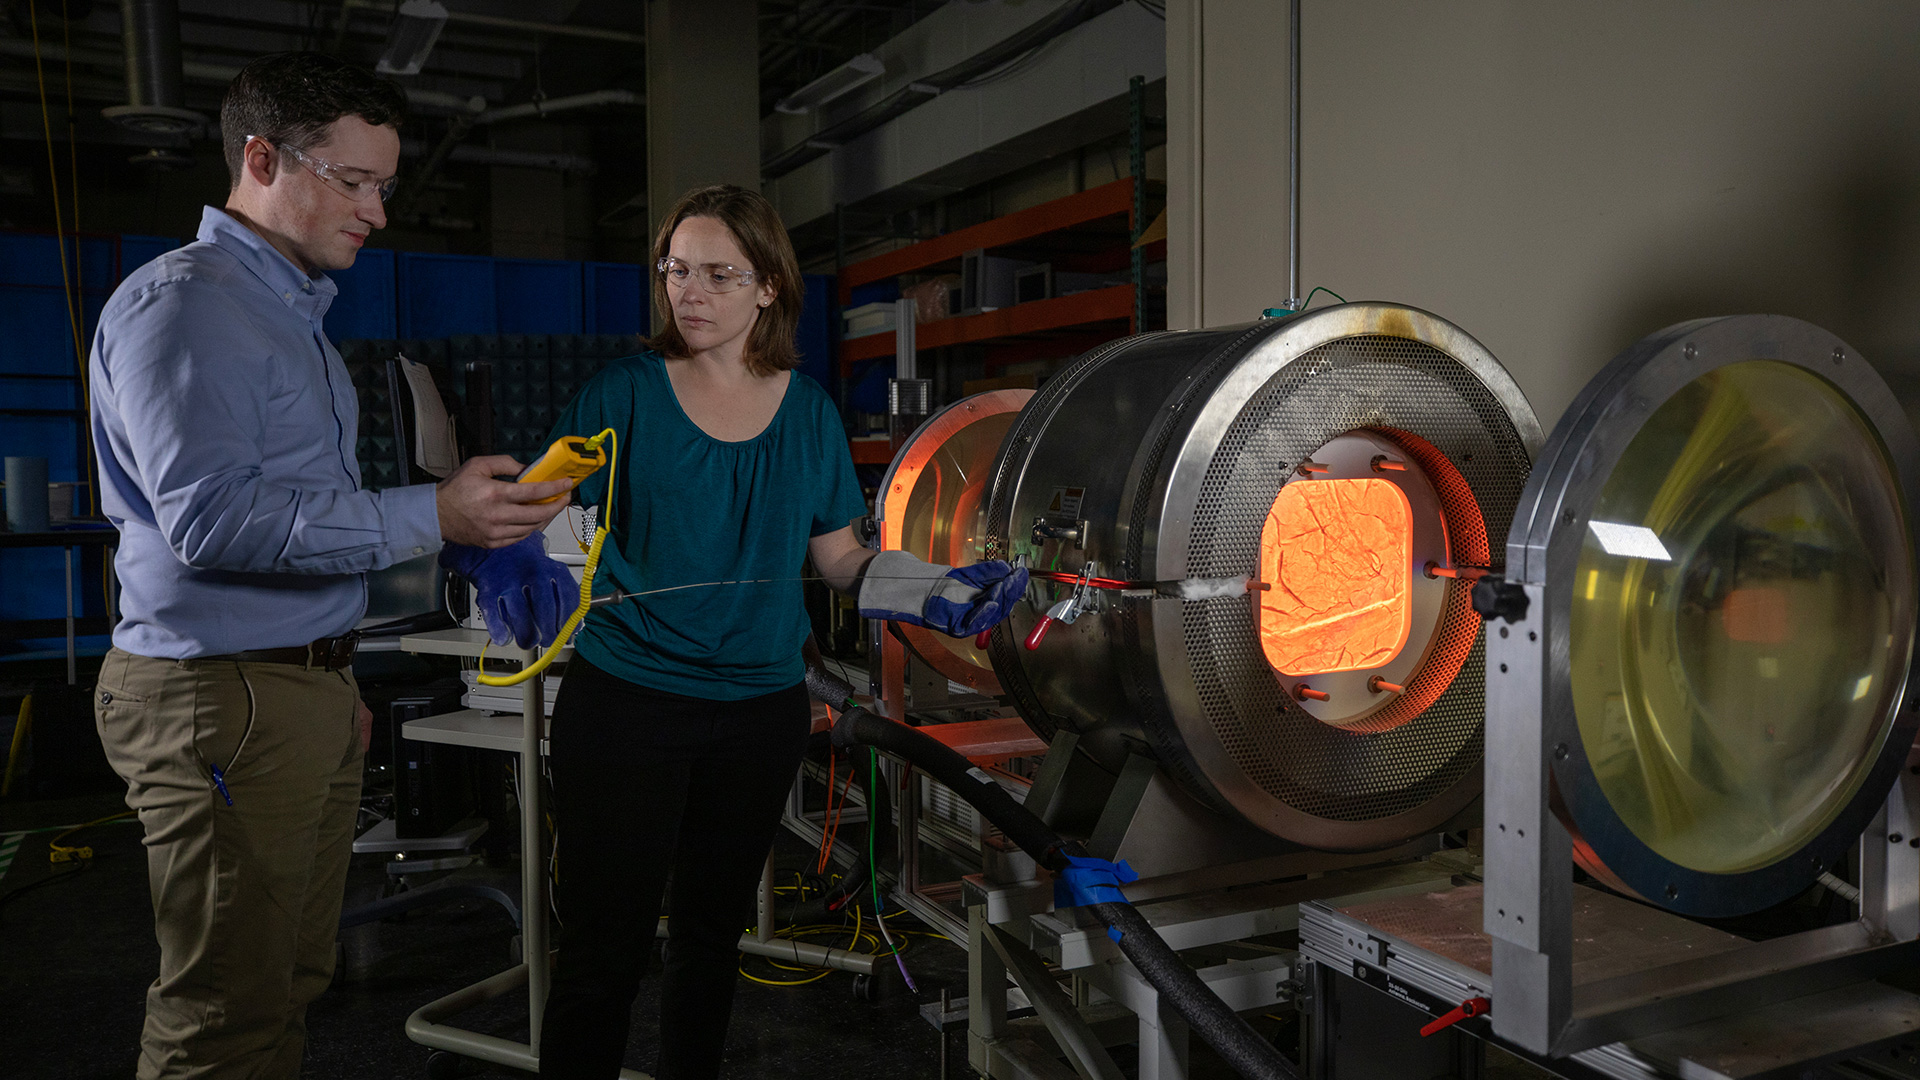 Two research standing in front of large furnace device glowing red.